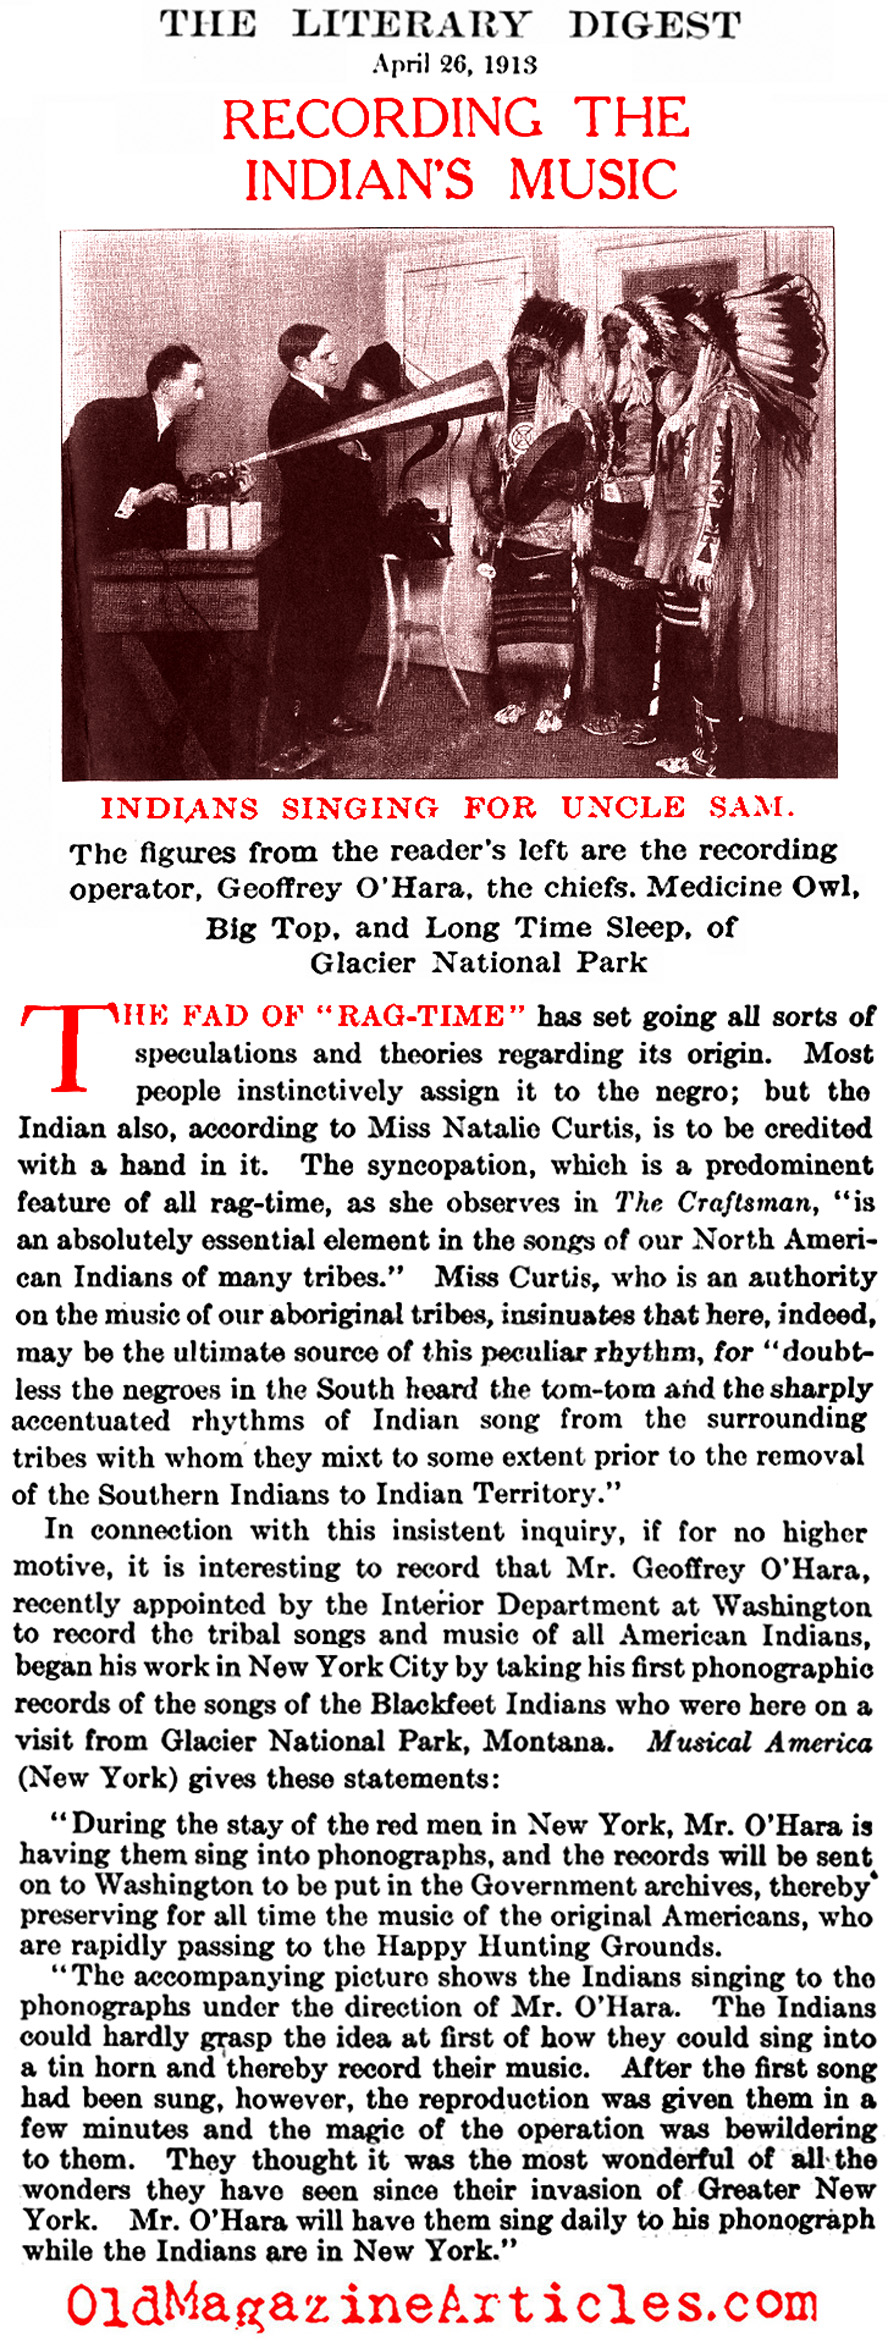 The Influence of the Natives on Rag Time Music  (The Literary Digest, 1913)